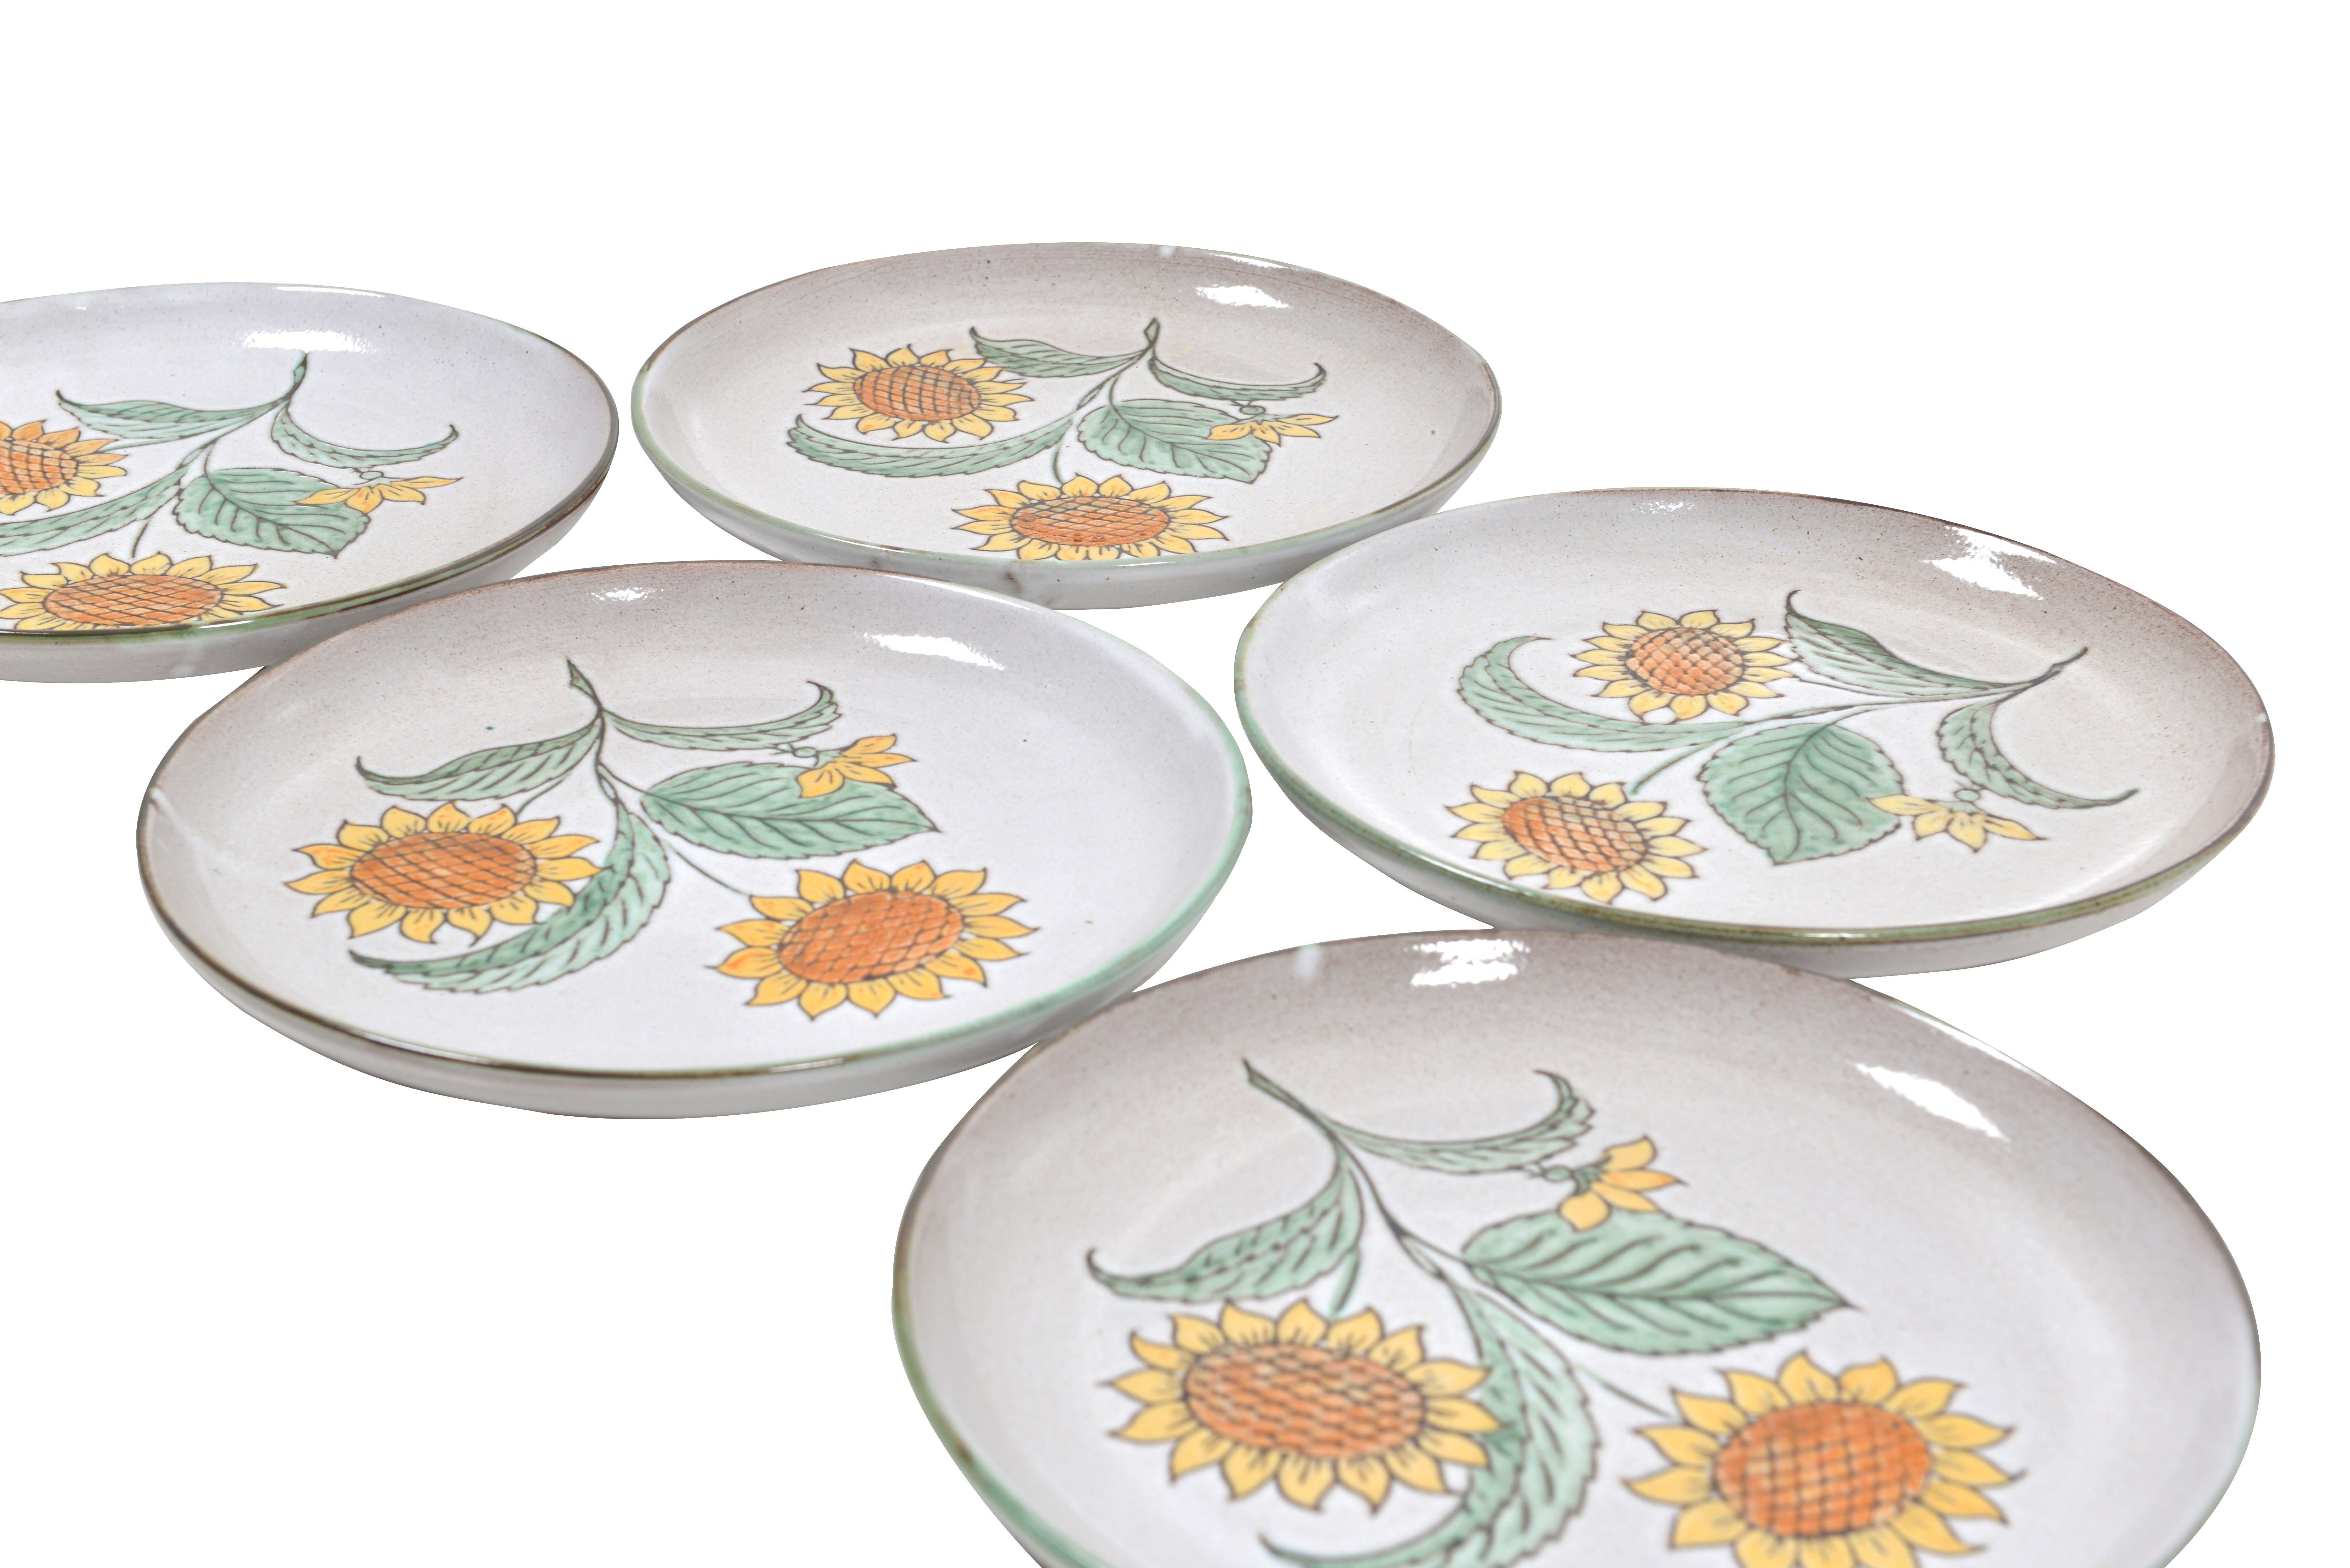 Ceramic Set of 5 French Midcentury Sunflower Plates, circa 1950 For Sale